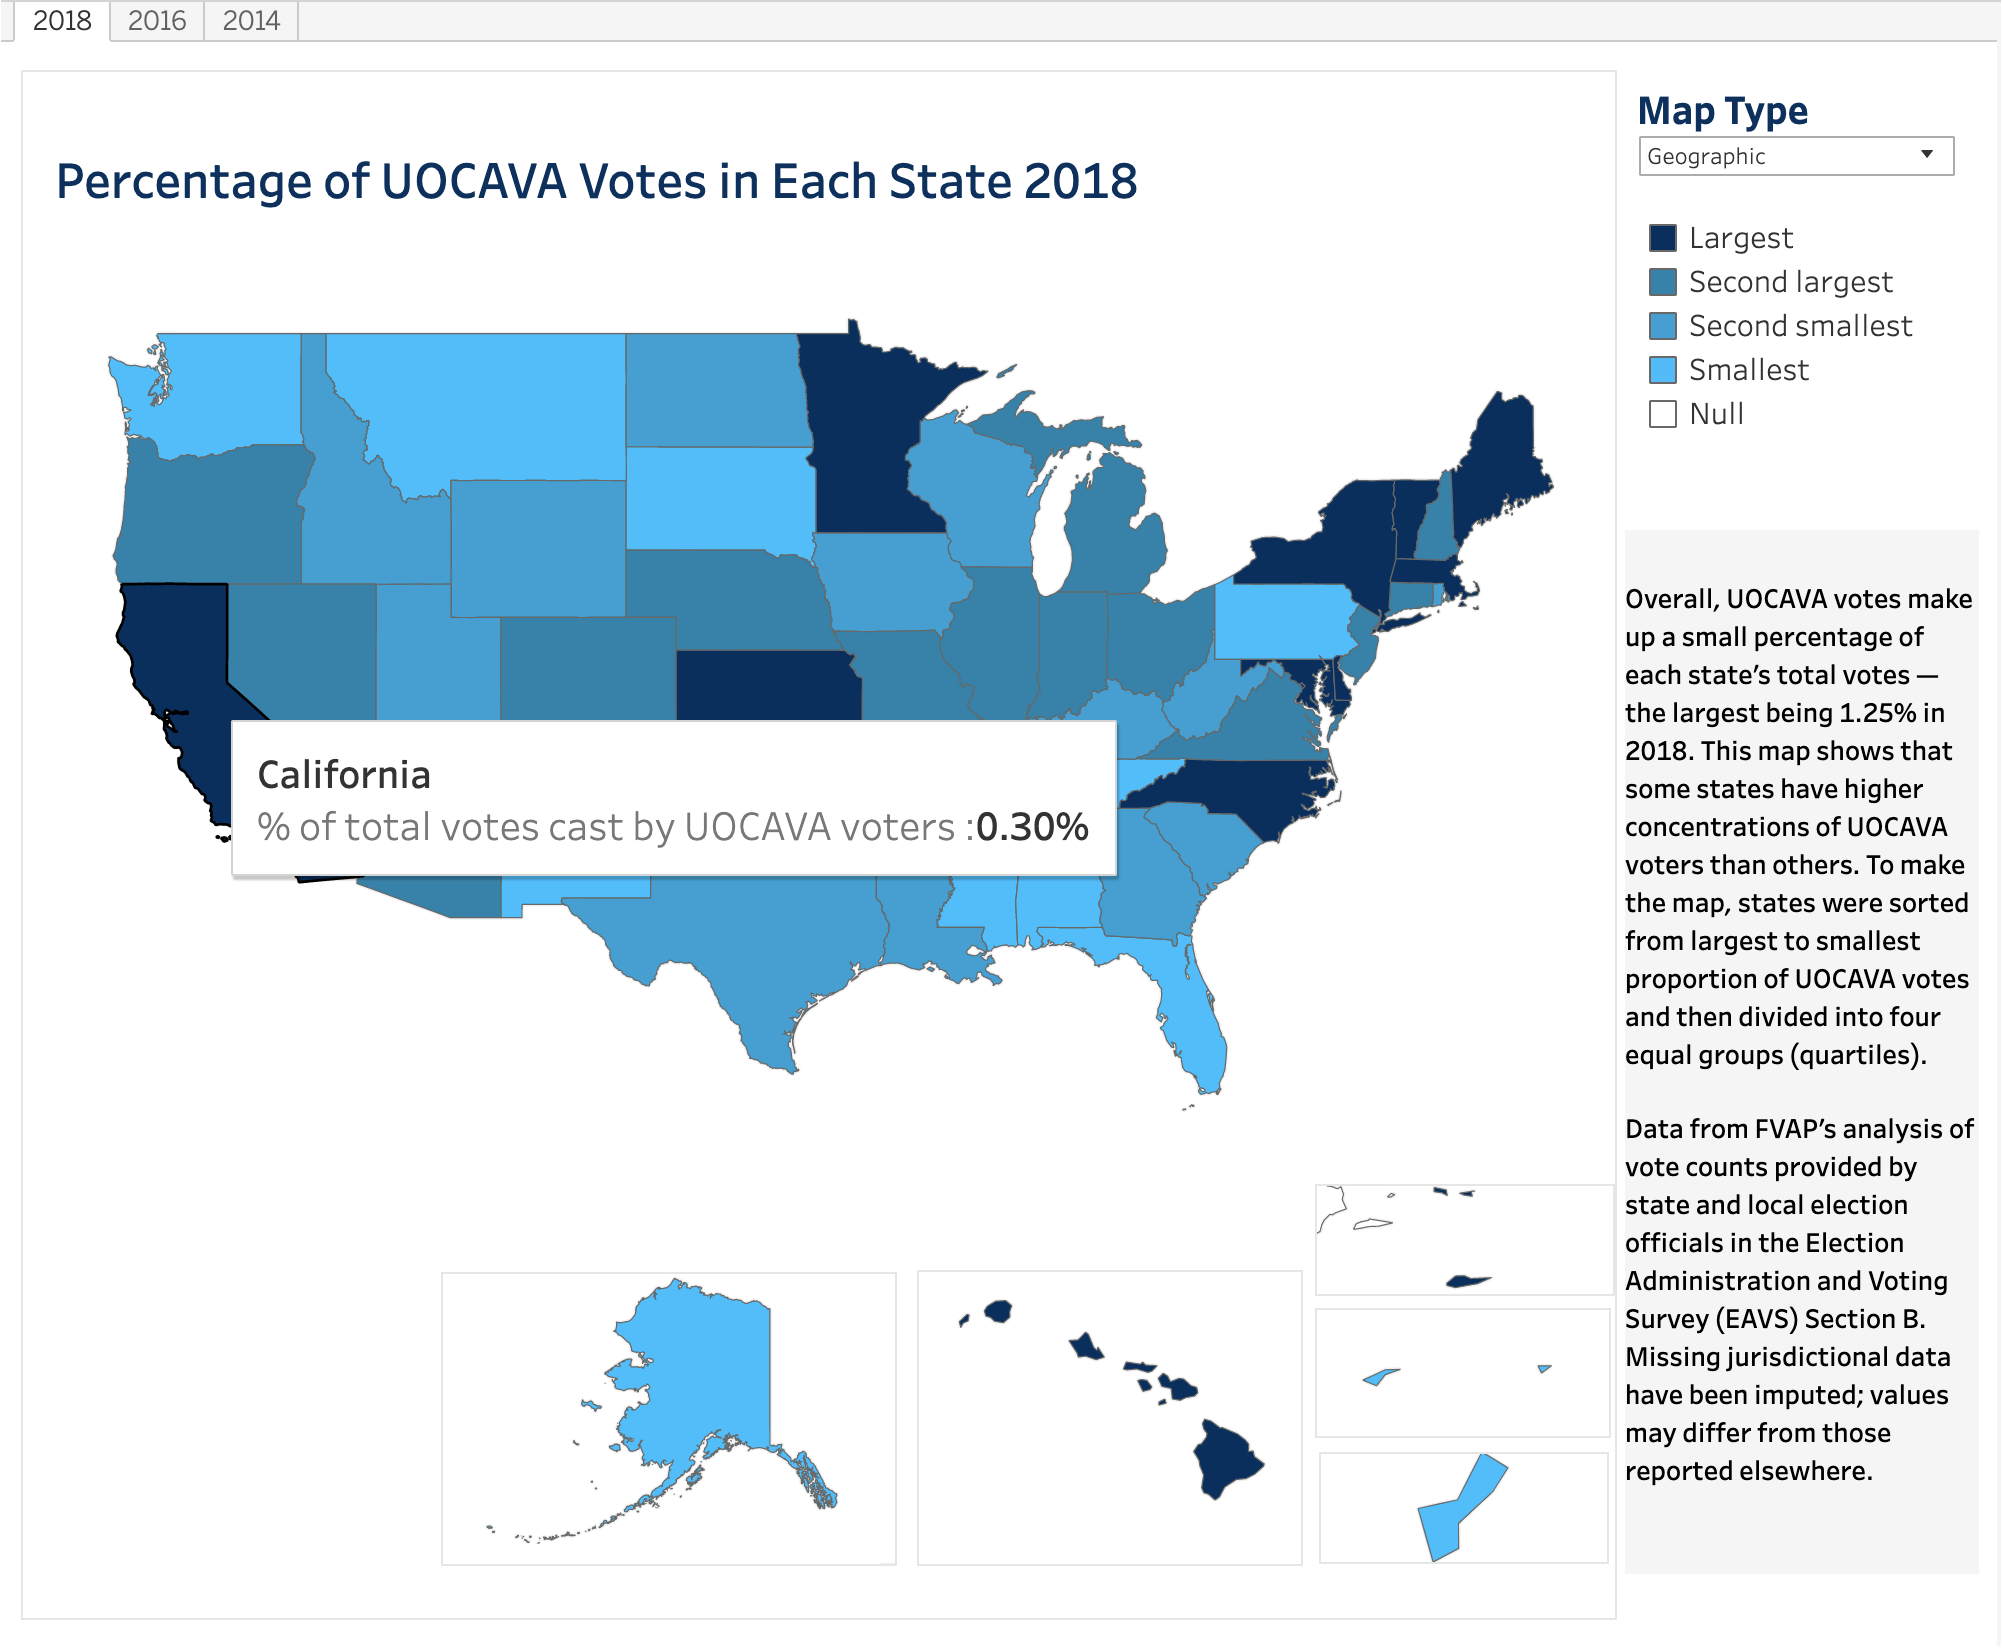 Percentage of UOCAVA Voters in Each State